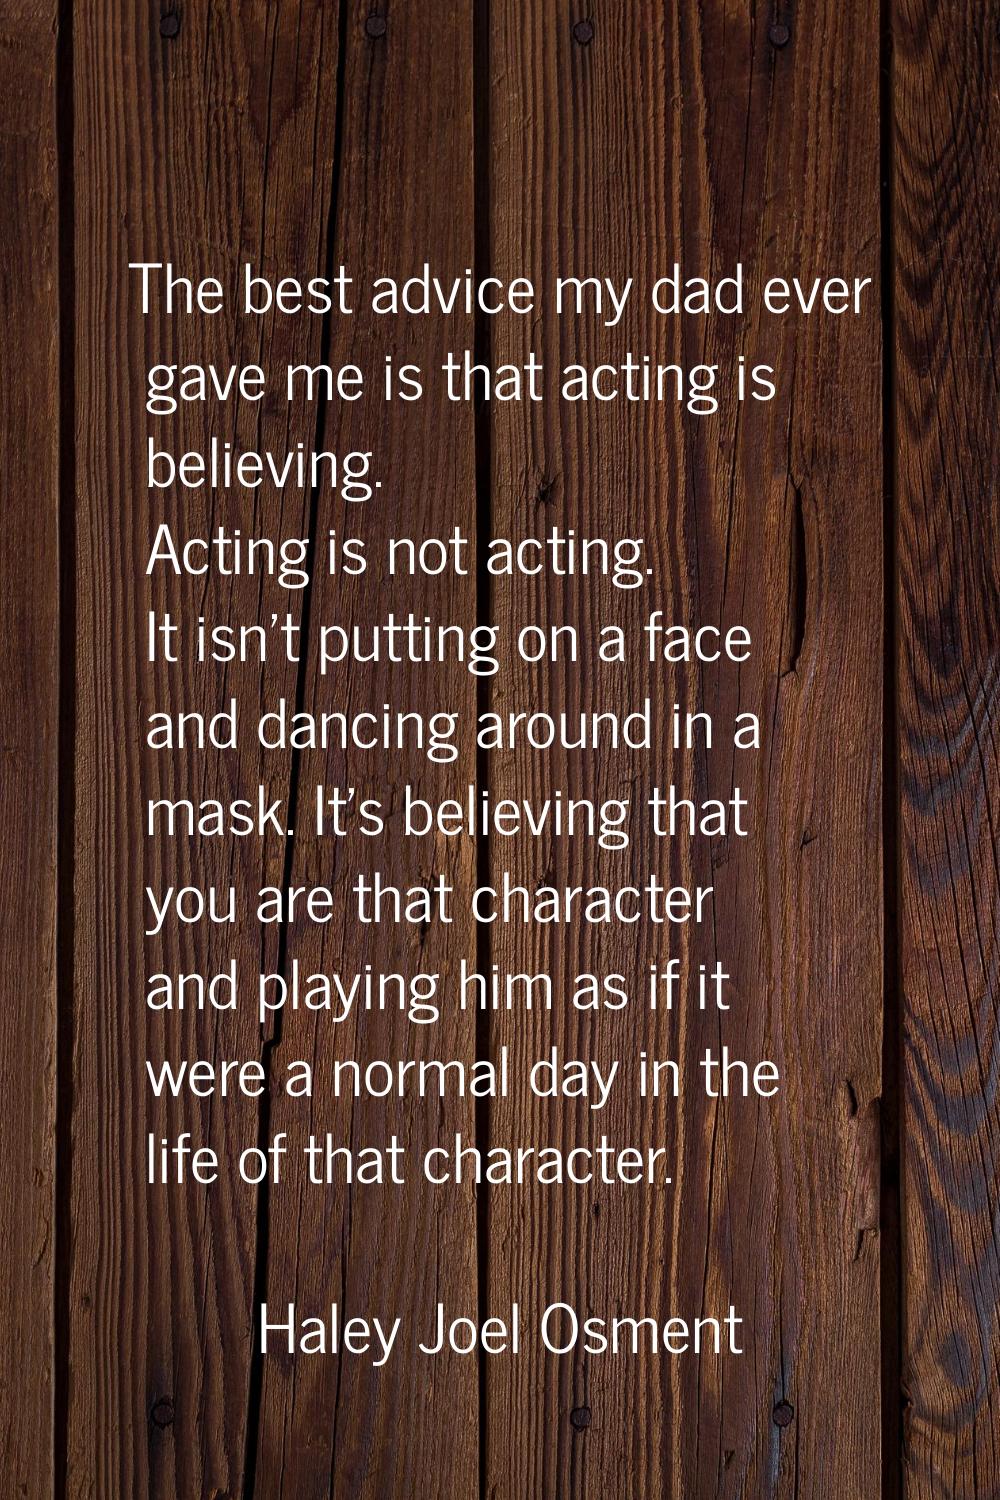 The best advice my dad ever gave me is that acting is believing. Acting is not acting. It isn't put